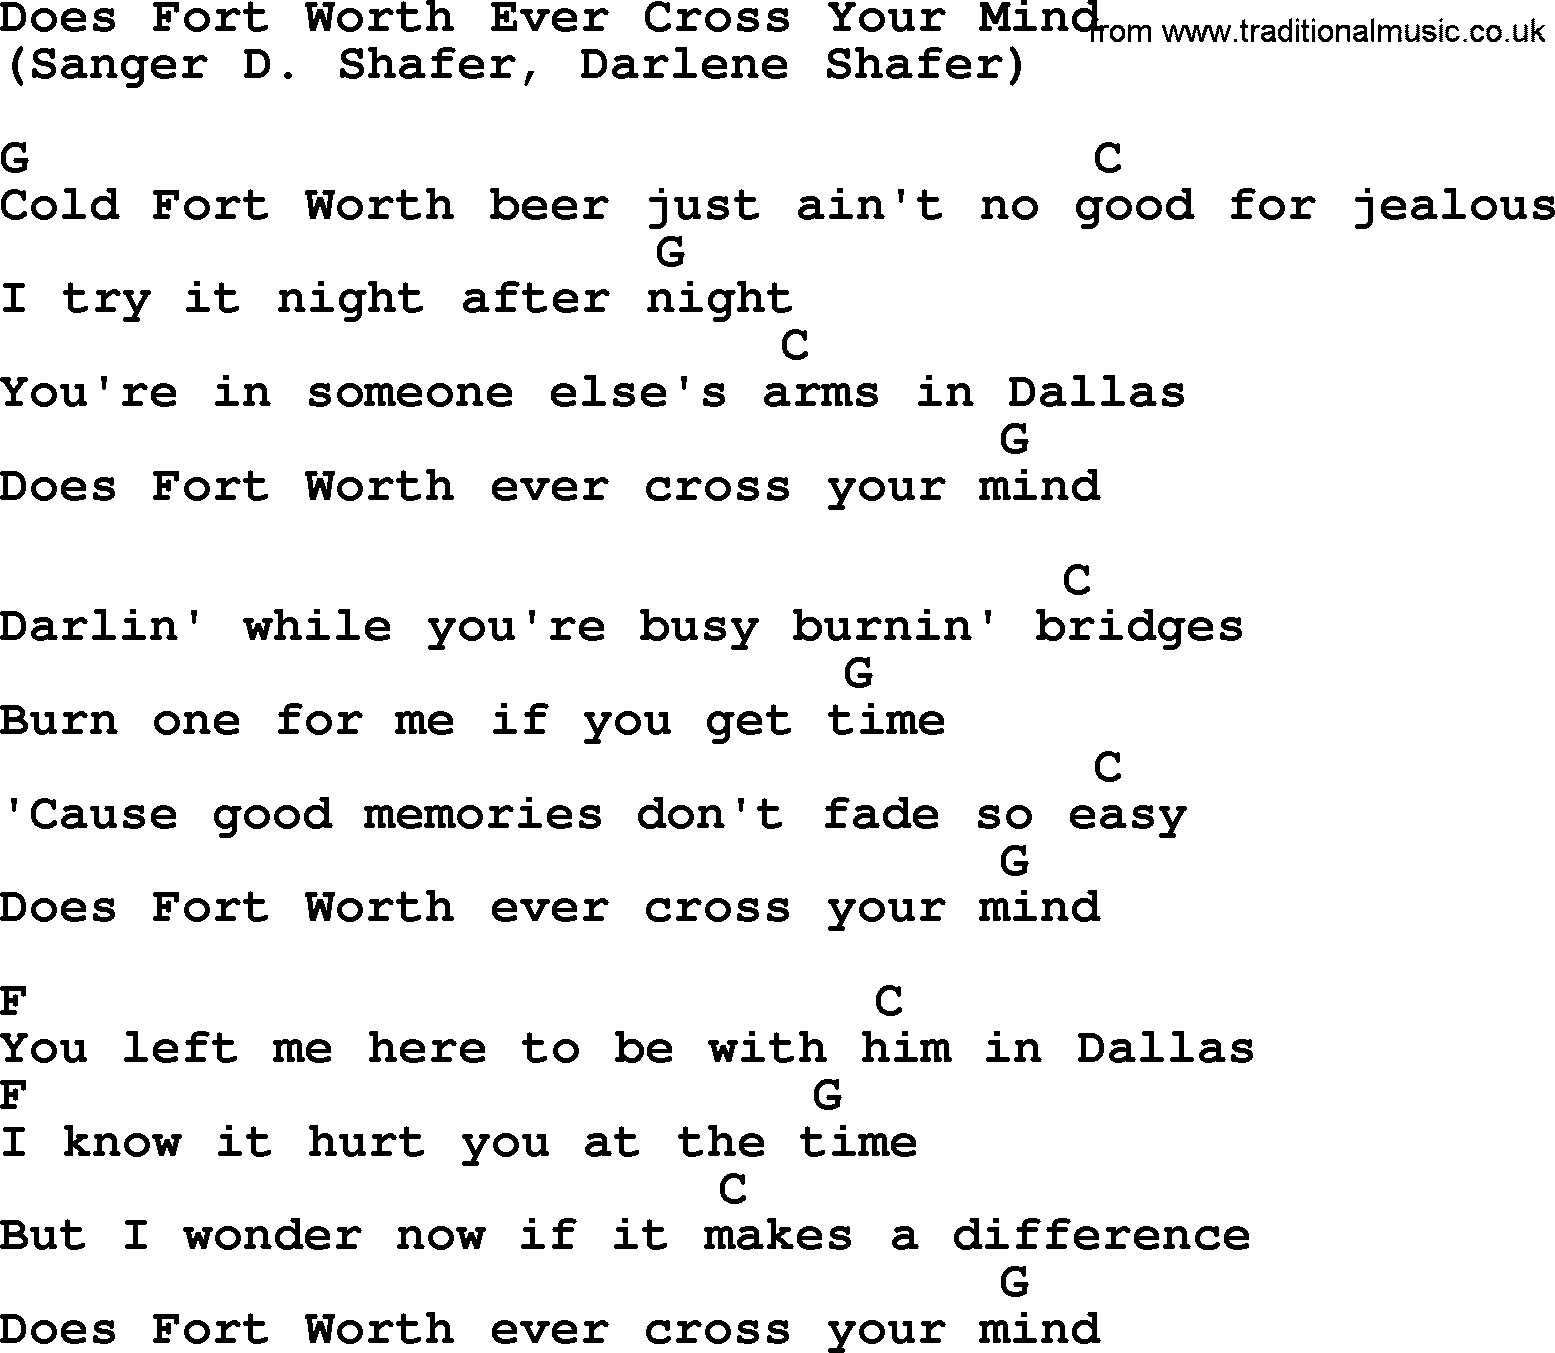 George Strait song: Does Fort Worth Ever Cross Your Mind, lyrics and chords